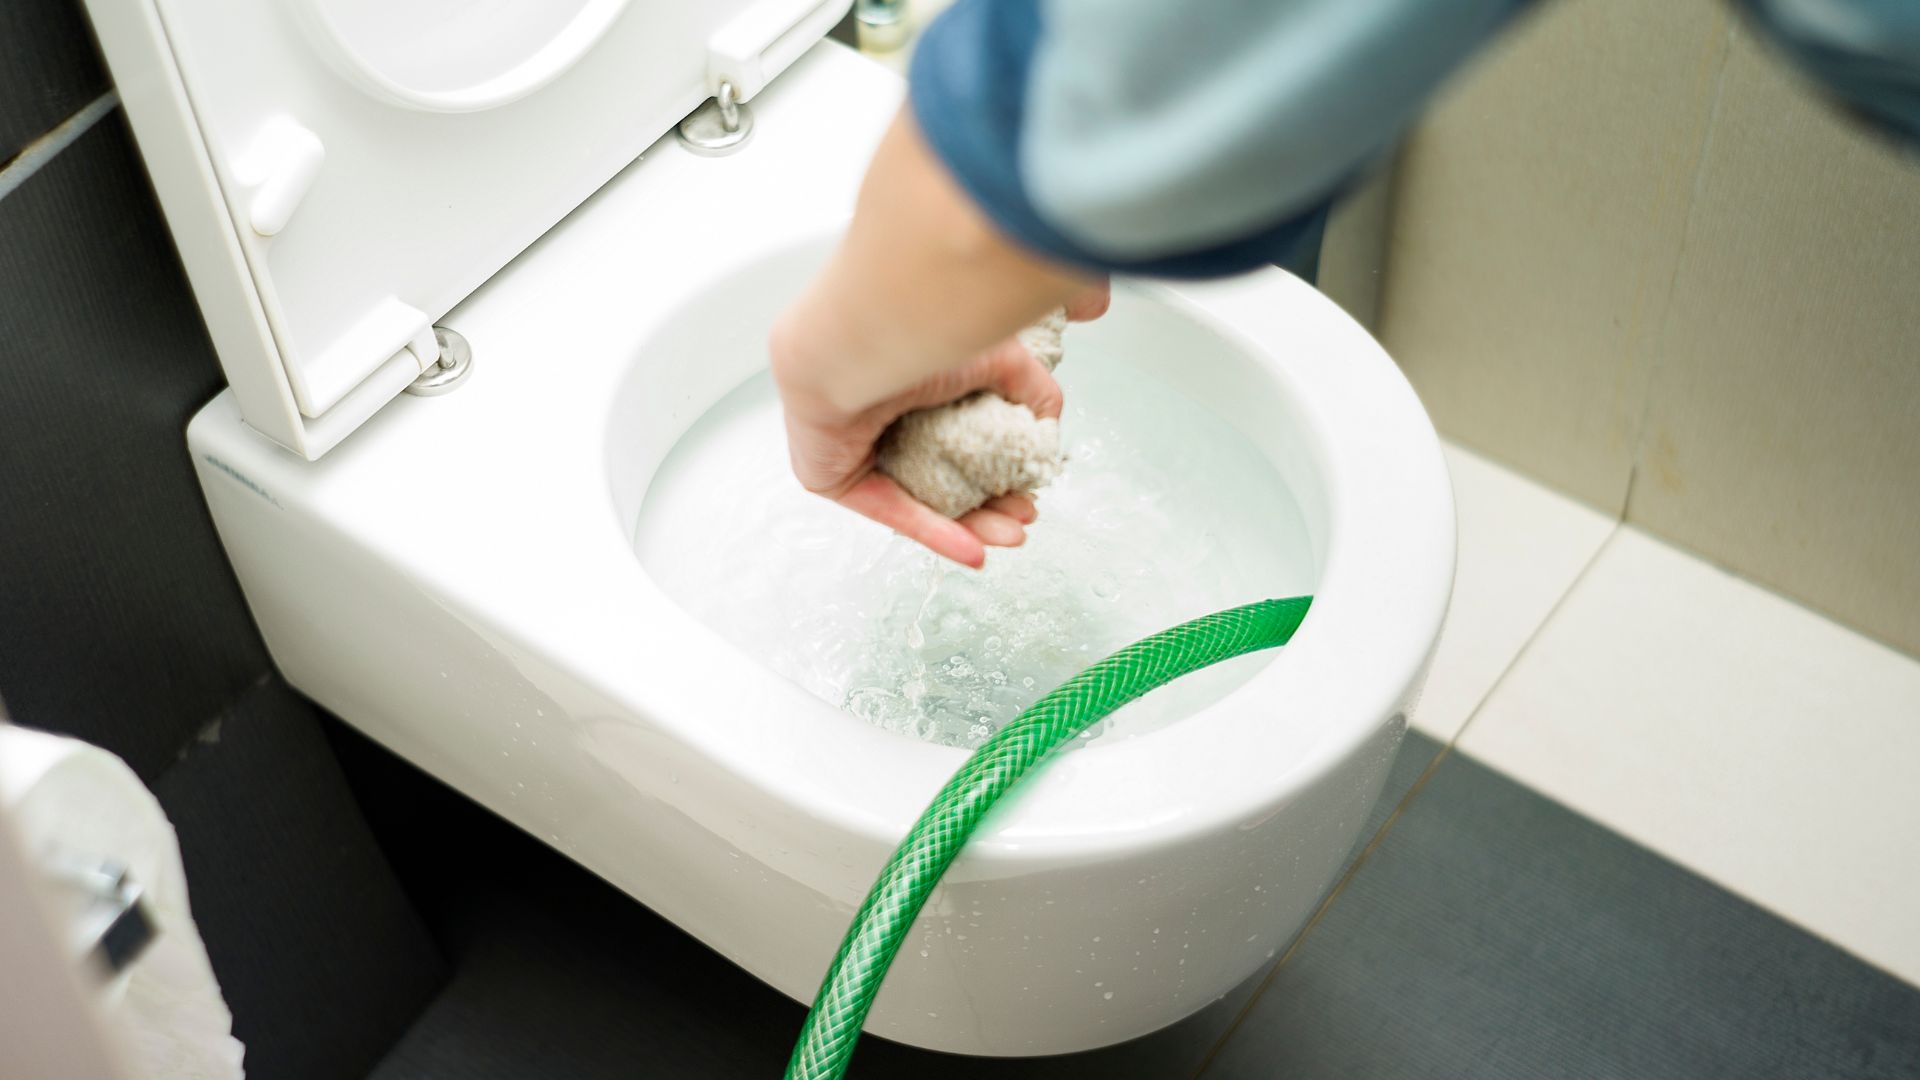 Reach out to CAN Plumbing and Drainage for comprehensive assistance with your toilet requirements, plumbers specialized in addressing all your needs.